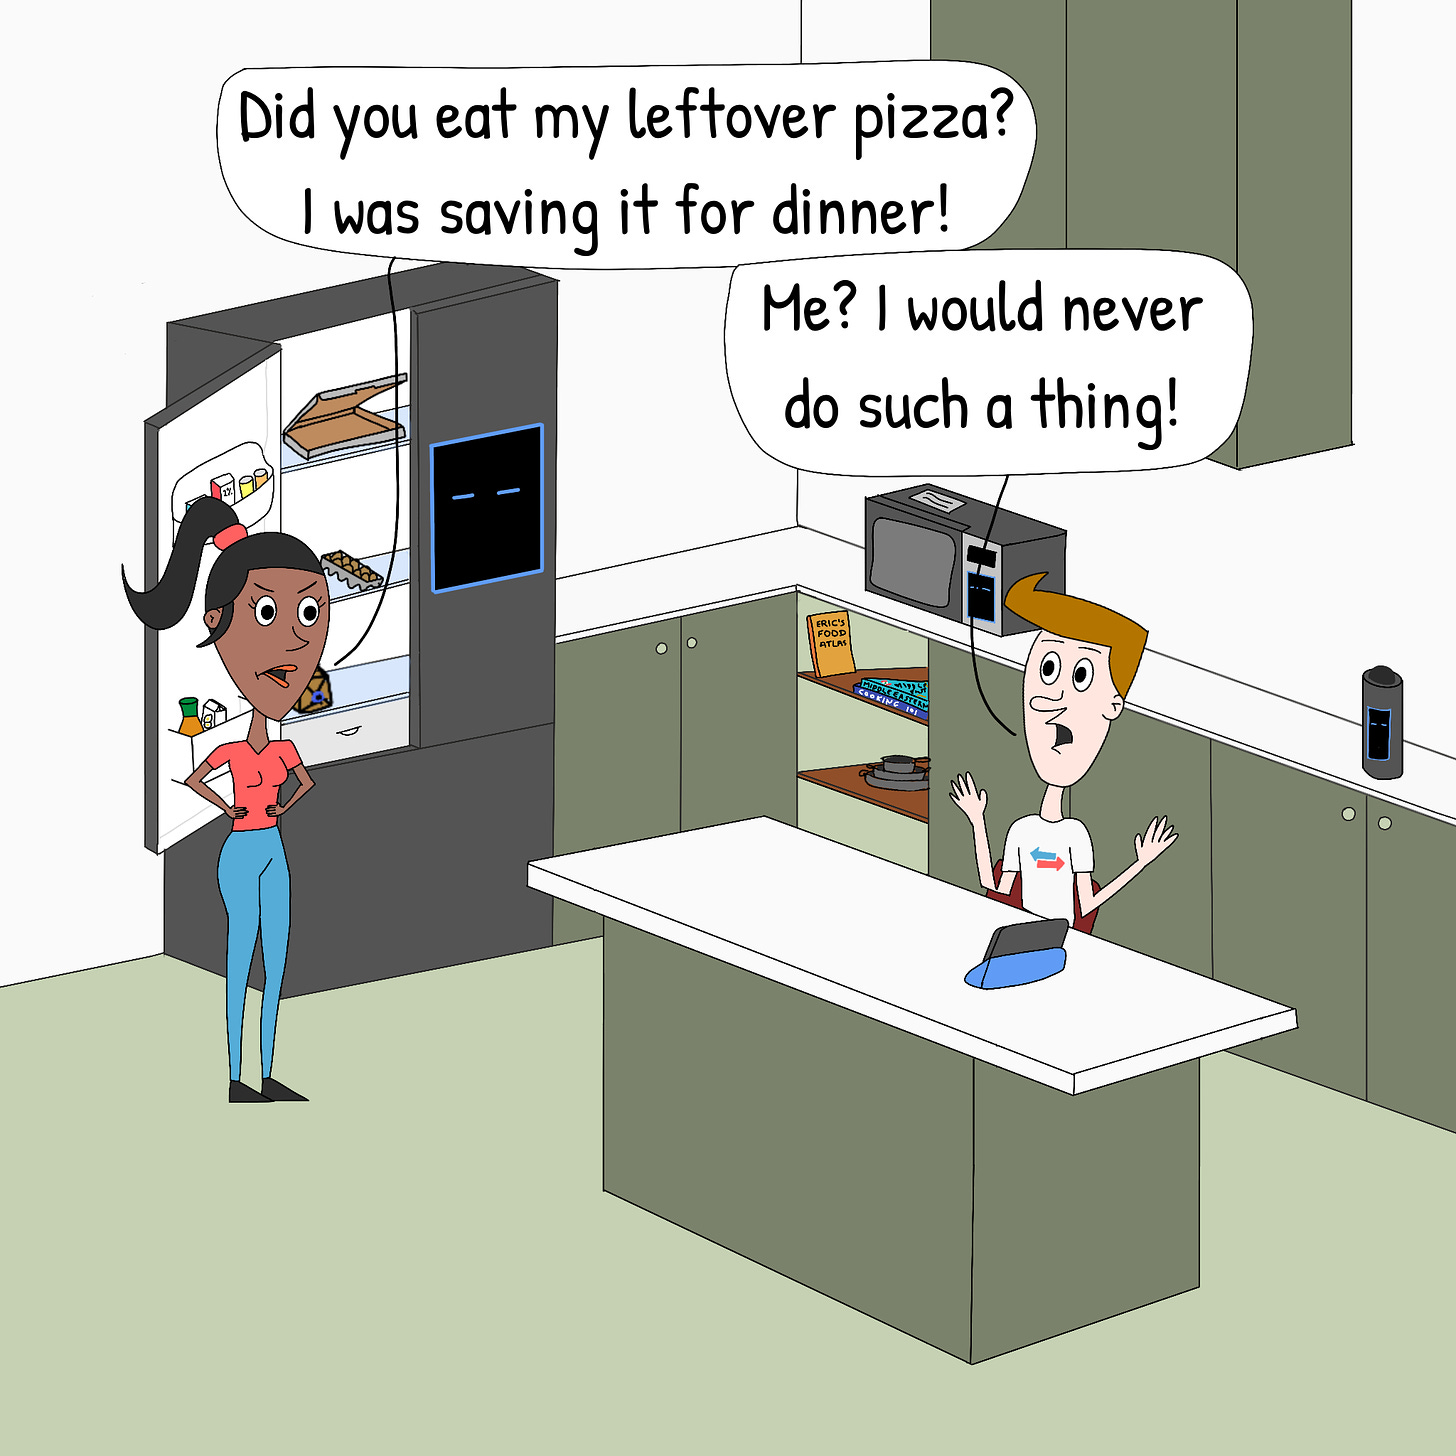 Panel 1: Tori opens the fridge and finds that her leftover pizza is missing. She asks Vic angrily "Did you eat my leftover pizza? I was saving it for dinner!". Vic, raising his hands to plead his innocence, replies "Me? I would never do such a thing".